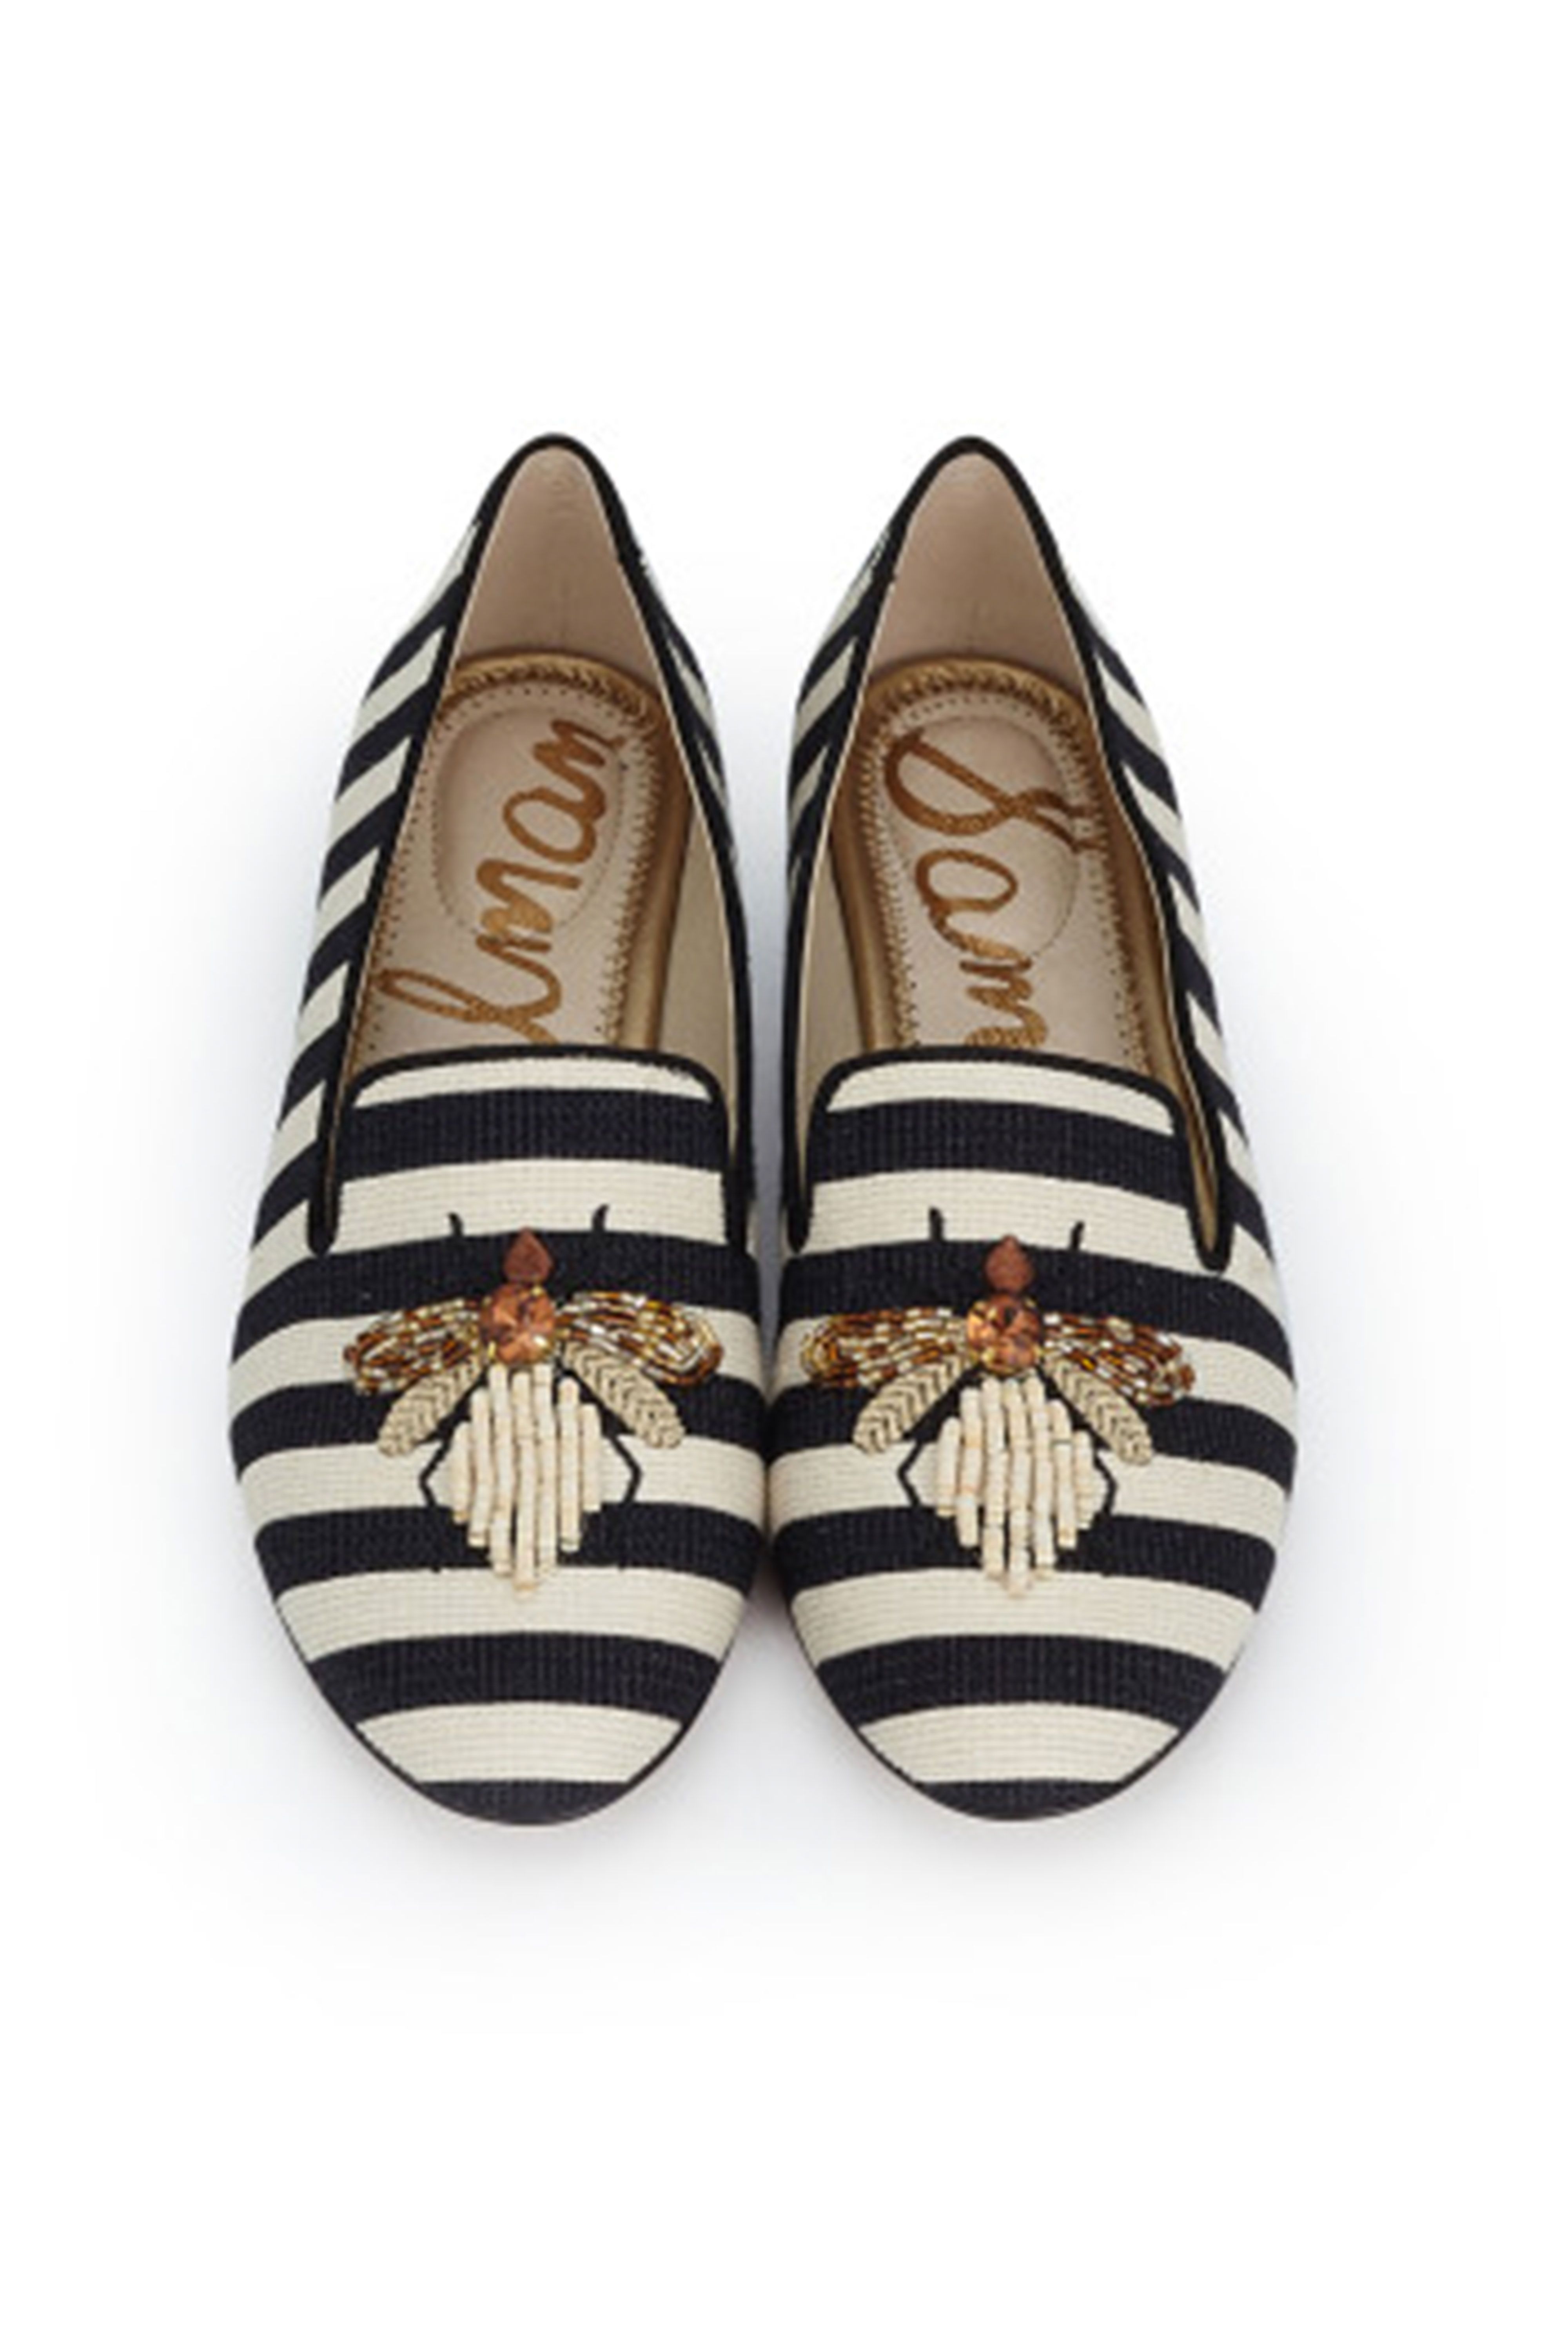 Preppy Shoes for Women - Preppy Style 